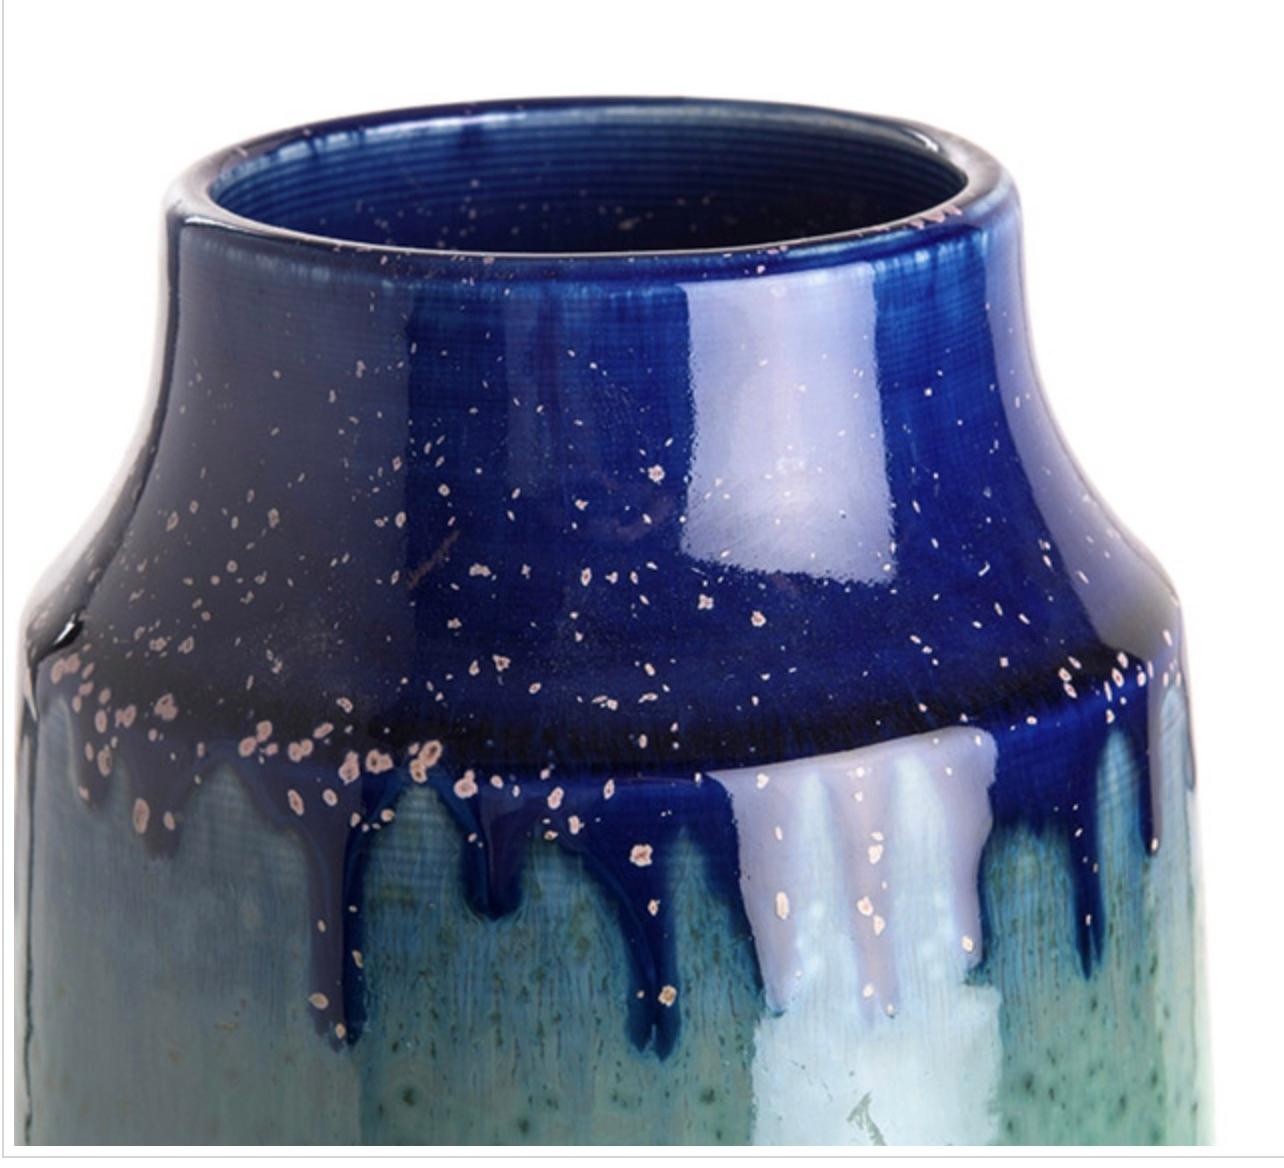 Contemporary Chinese ceramic vase in a tall cylinder shape.
Tapered top in royal blue color showing dripped glaze.
Shades of jade in the body of the vase.
